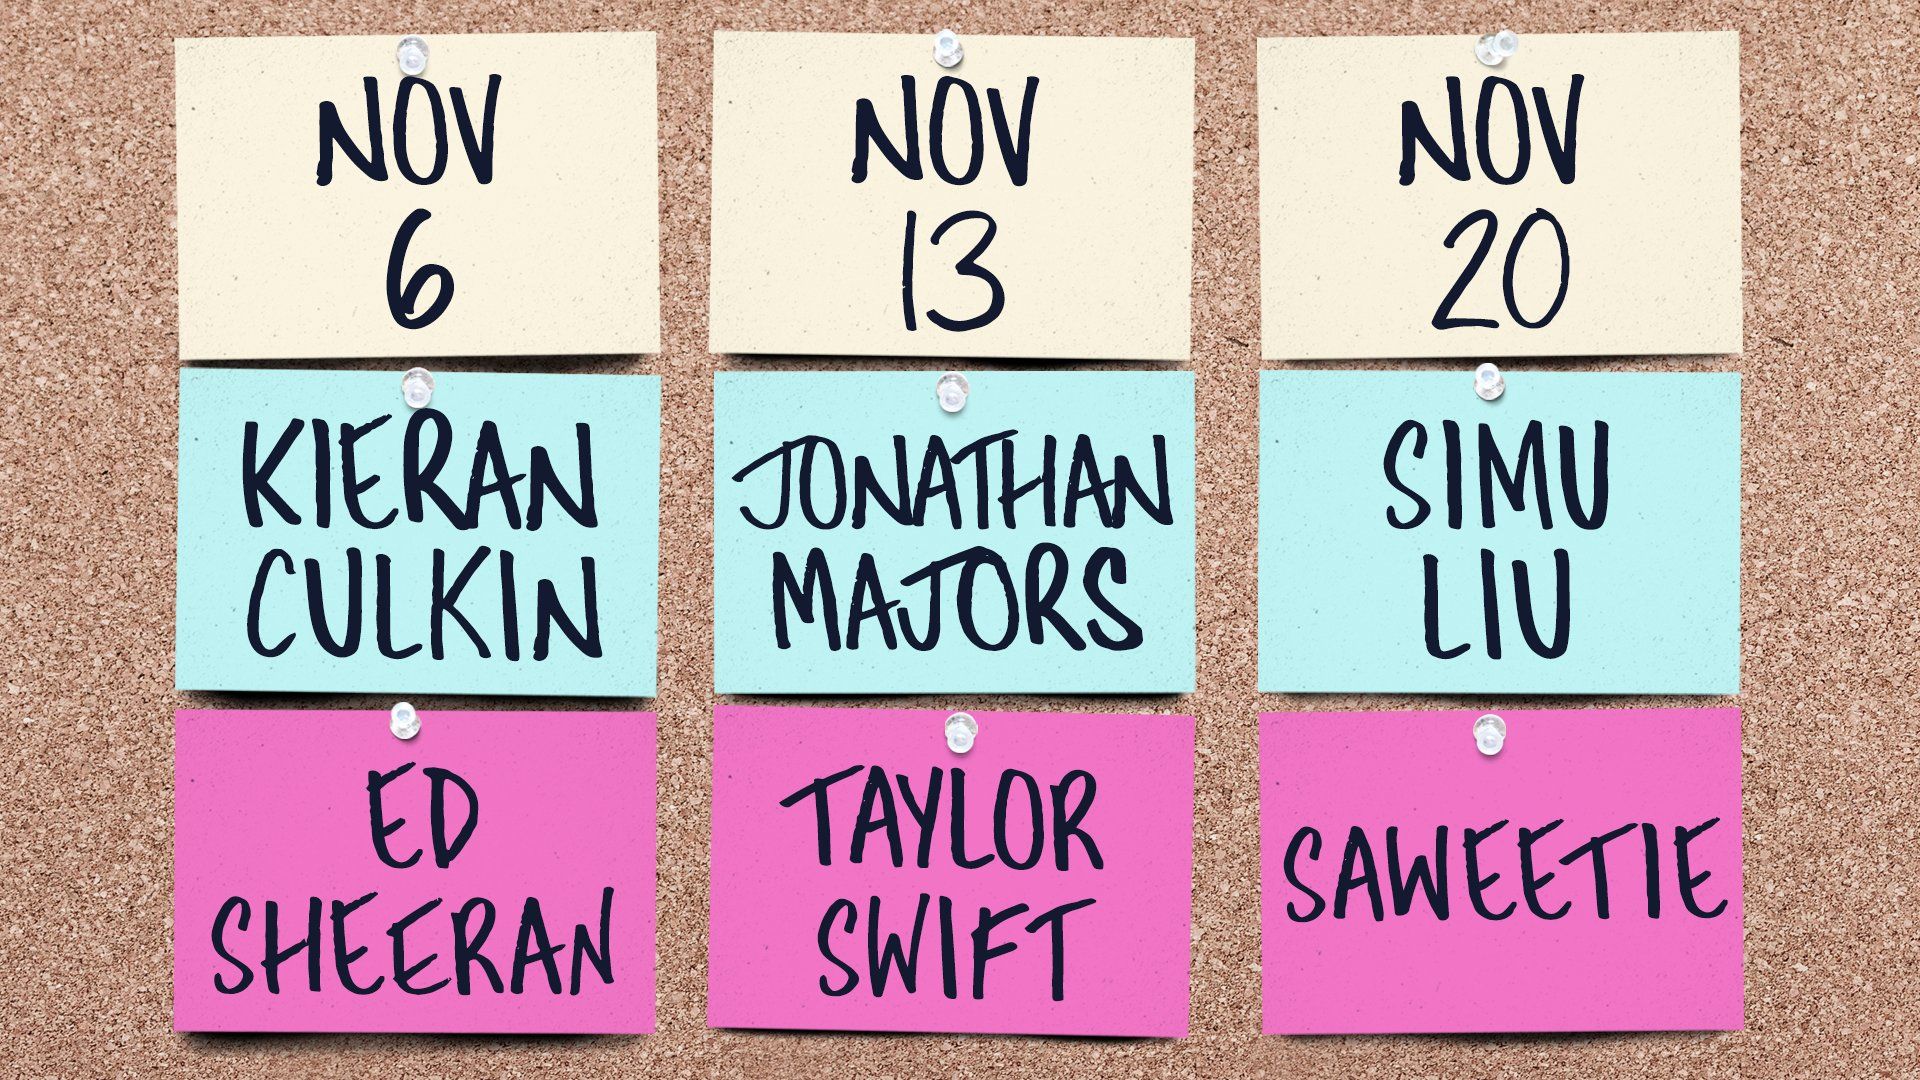 Saturday Night Live to feature Taylor Swift, Ed Sheeran in November line-up